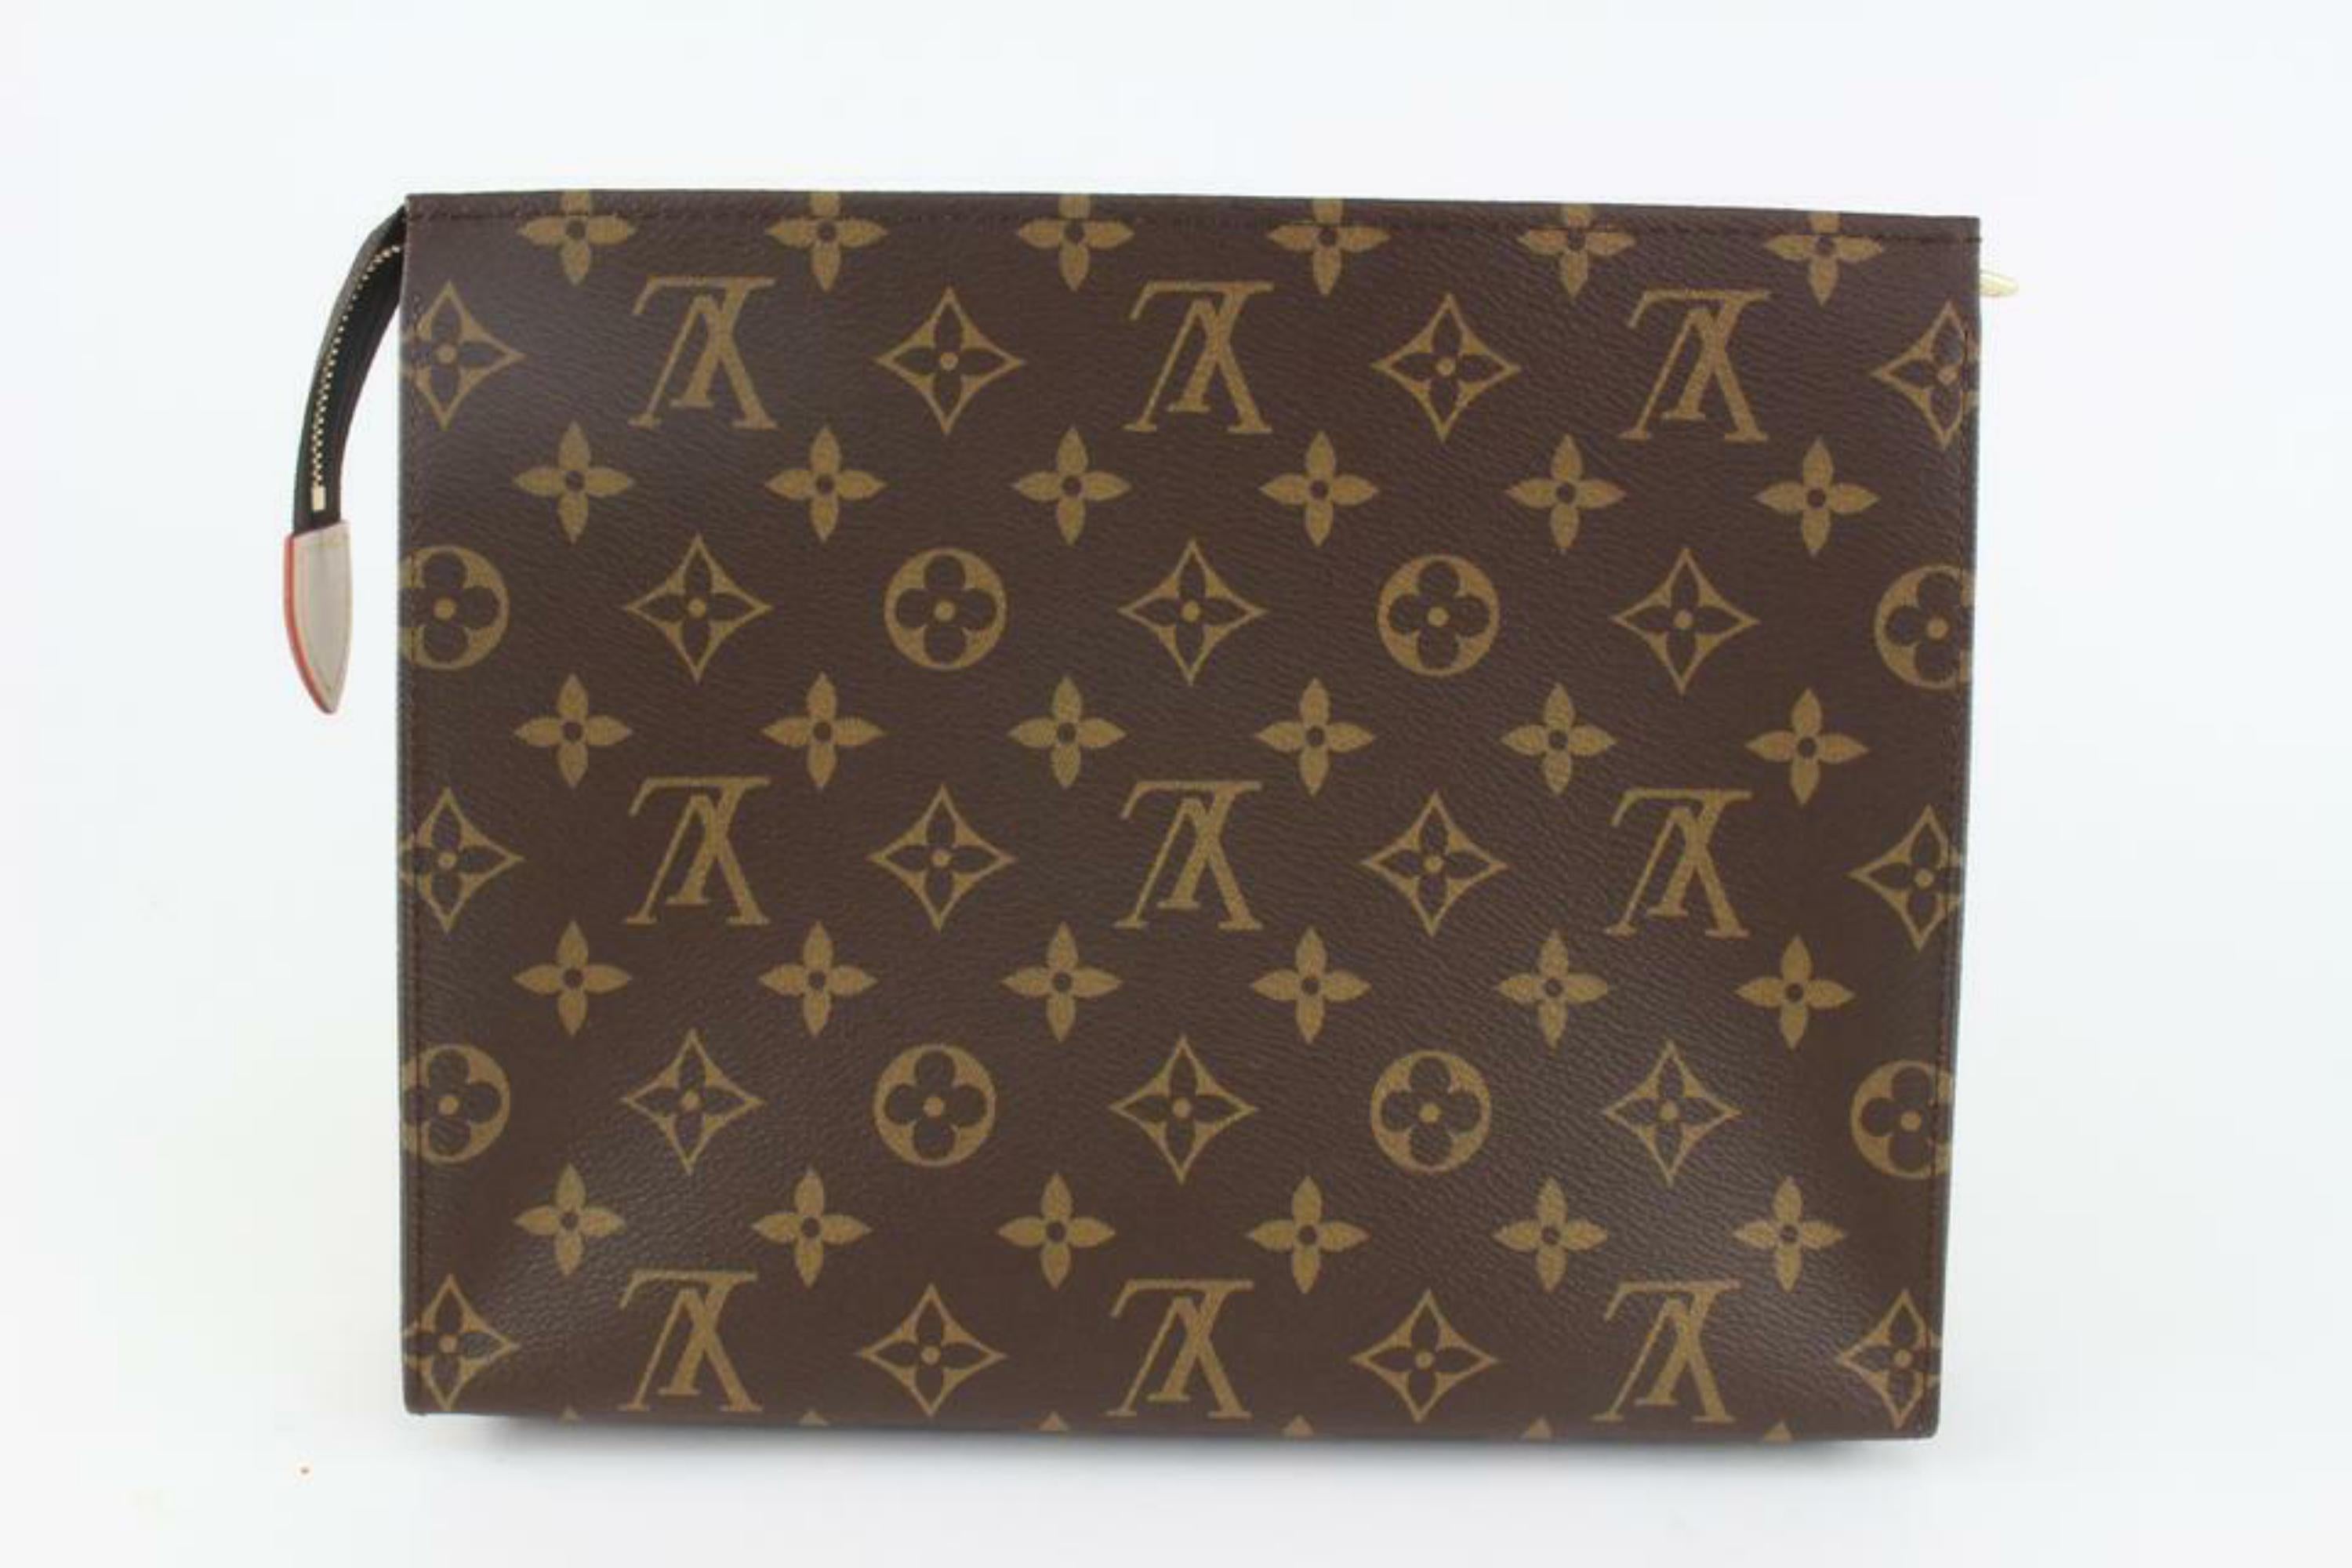 Black Louis Vuitton Discontinued Monogram Toiletry Pouch 26 Cosmetic Case 1LK1118 For Sale